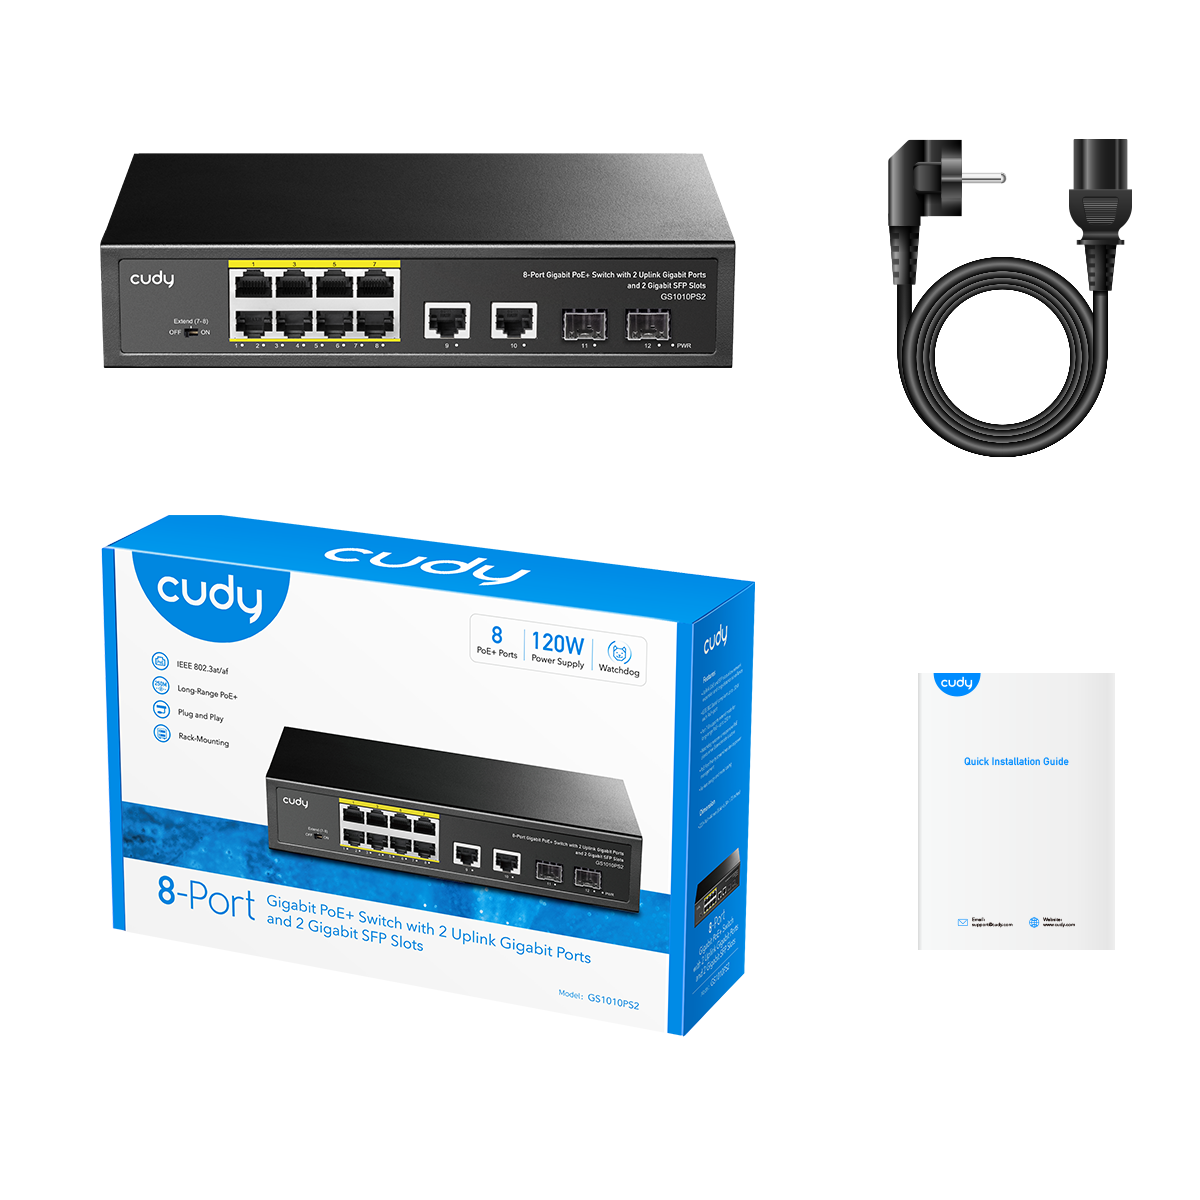 8-GbE PoE Switch with 2 Uplink GbE and 2 Uplink SFP, GS1010PS2 1.0